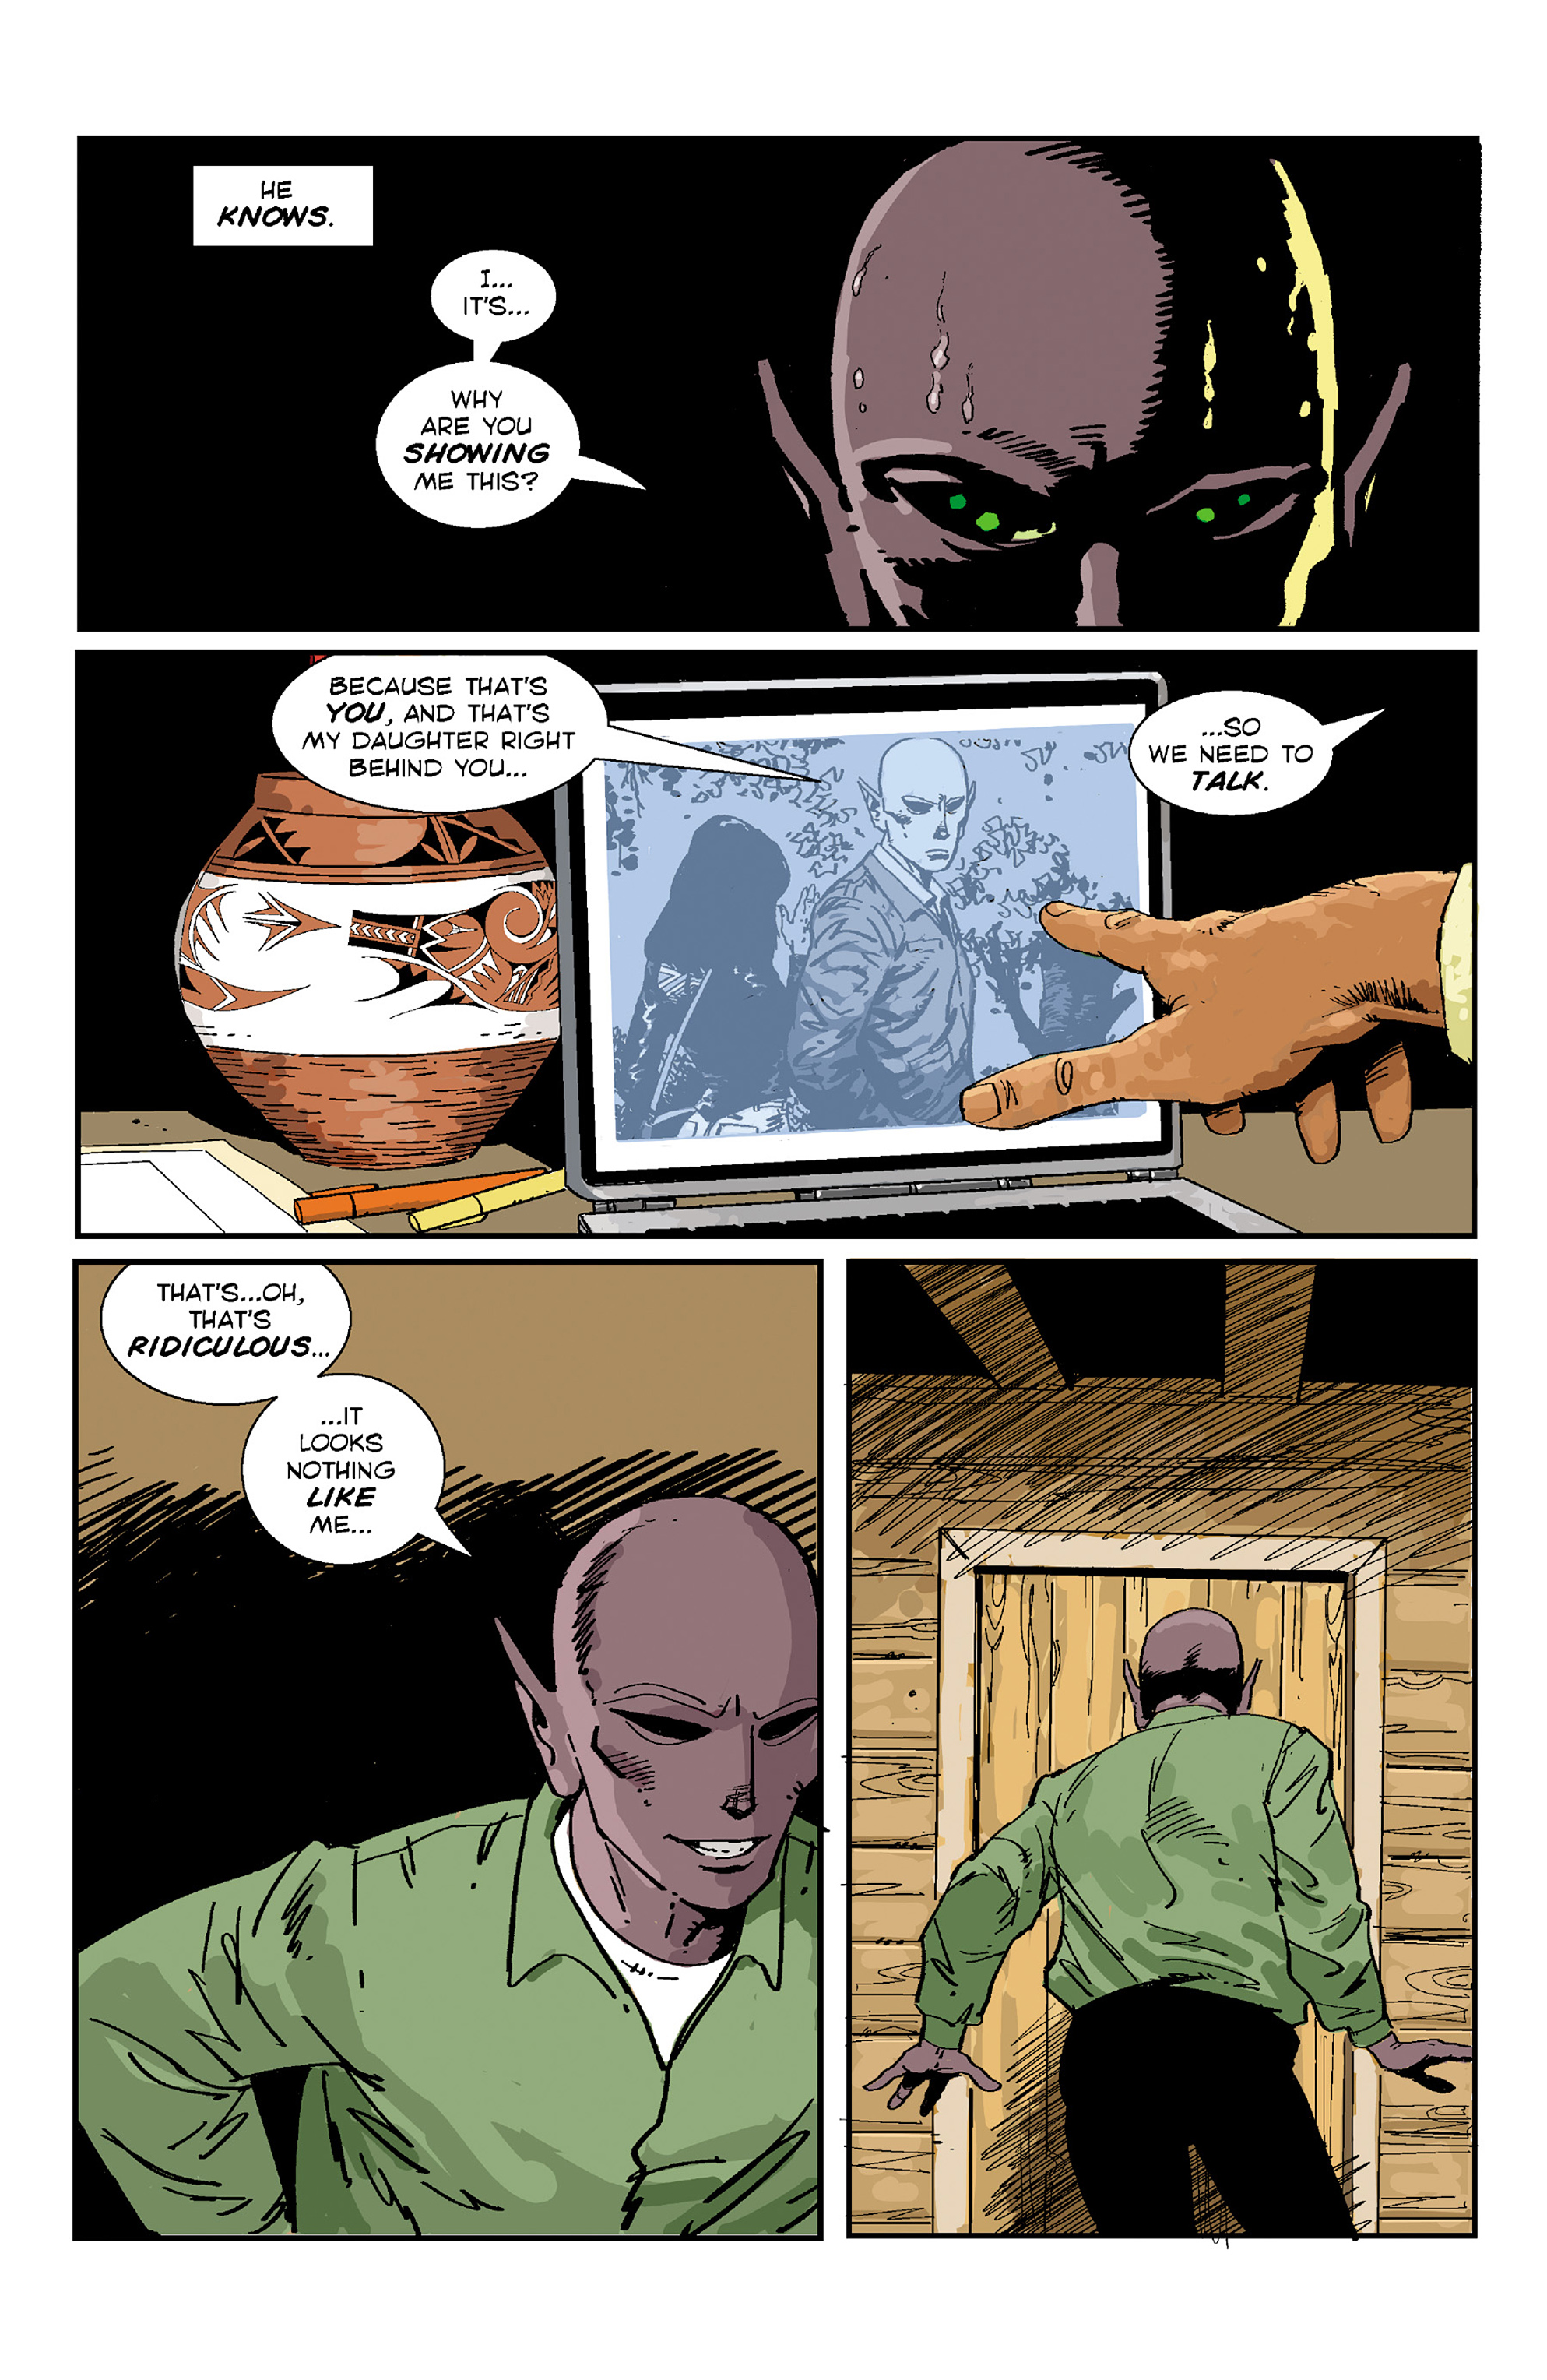 Resident Alien - The Man with No Name (2016): Chapter 3 - Page 3